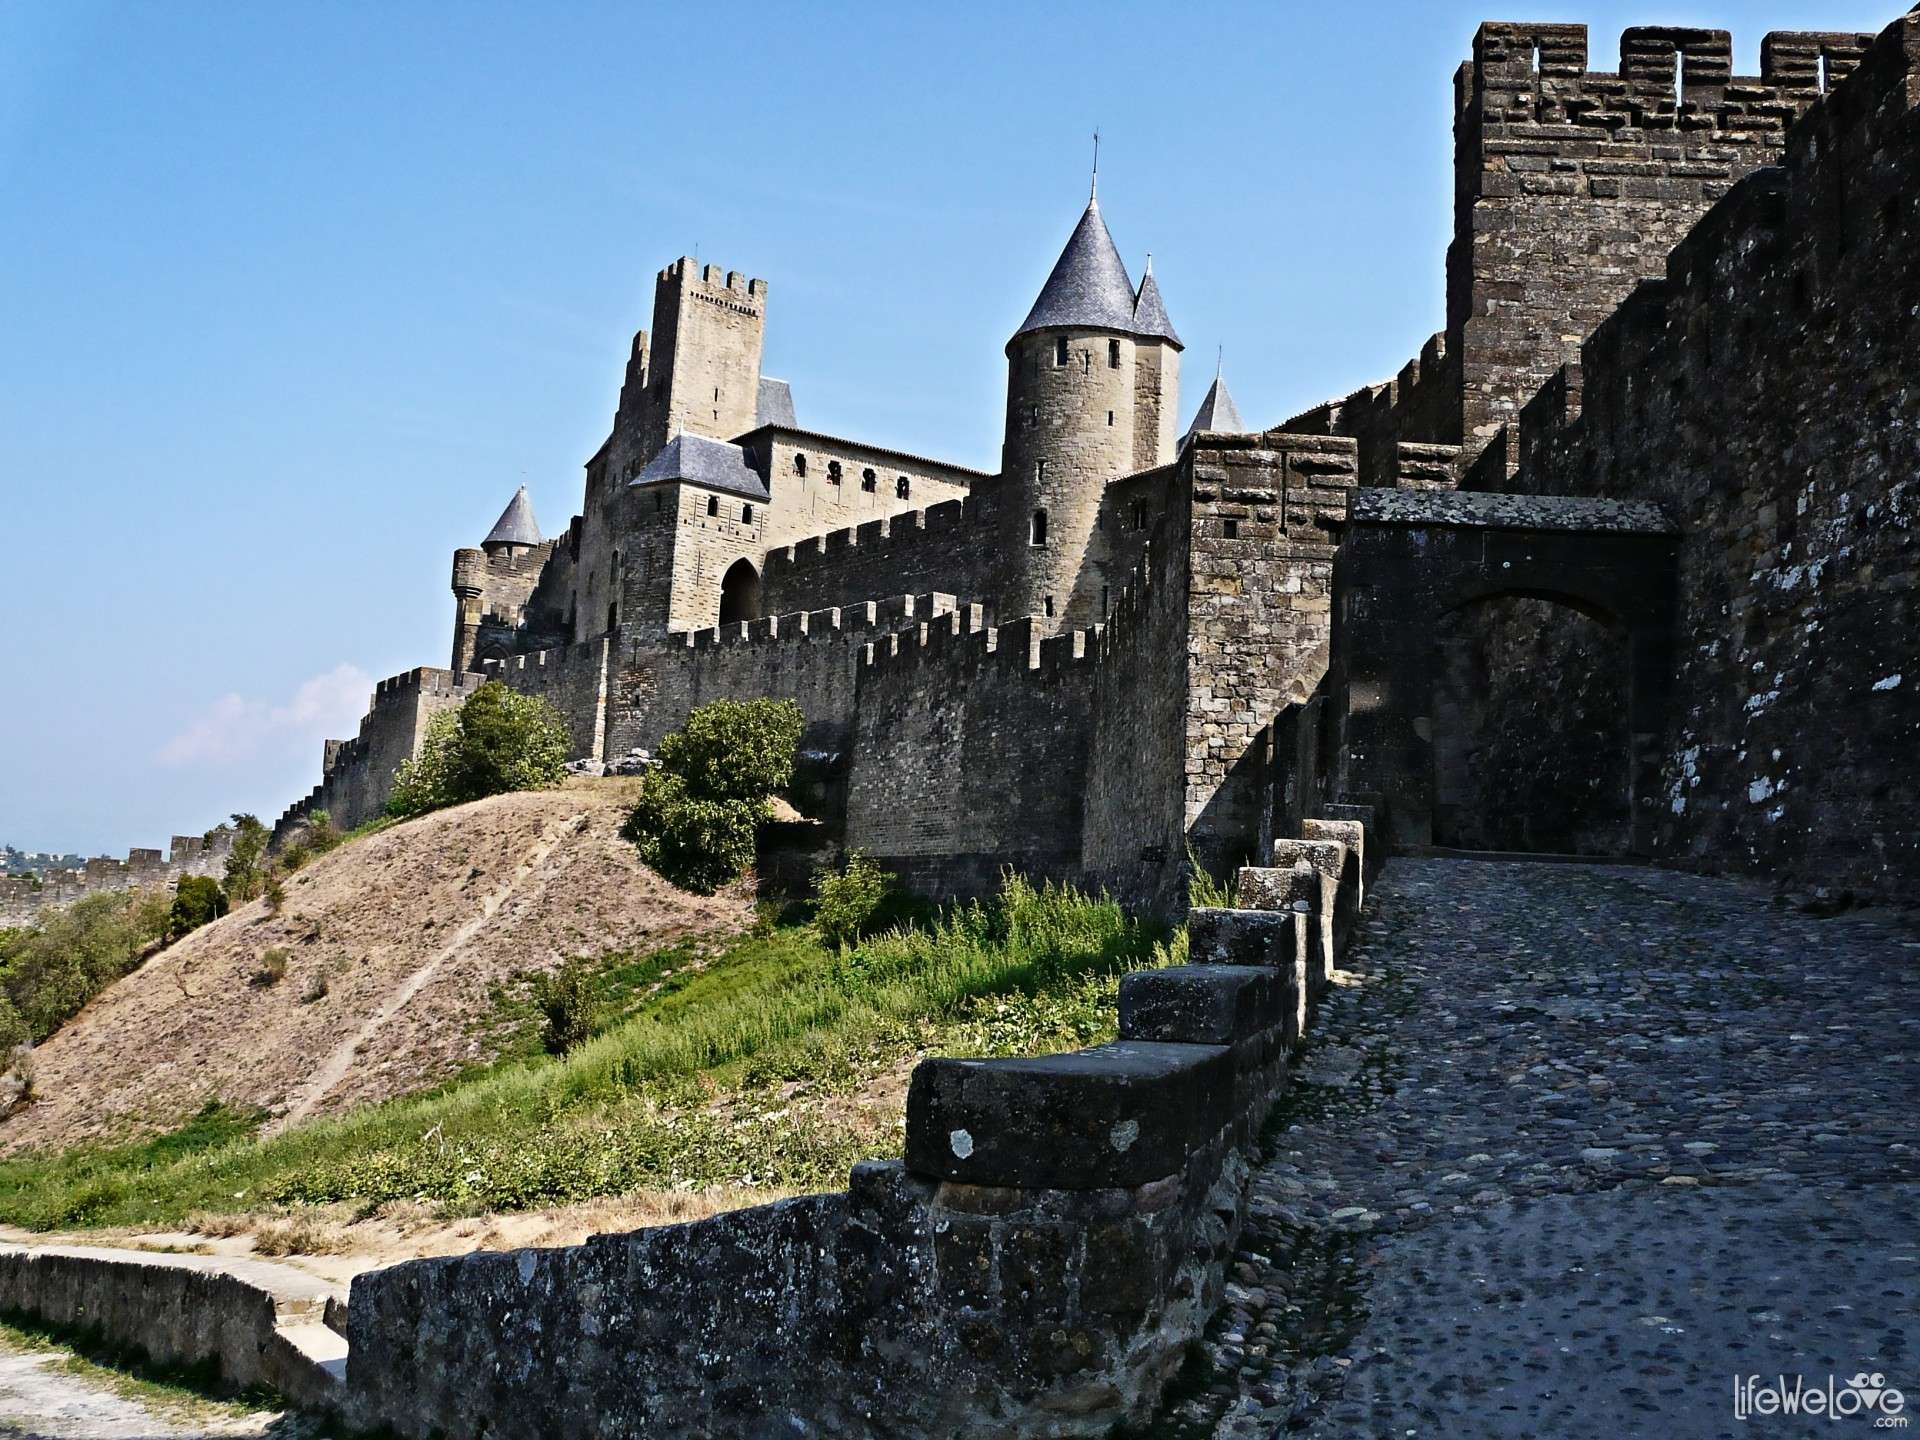 View Of Park Outside The Fortress Town Of Carcassonne In Southern